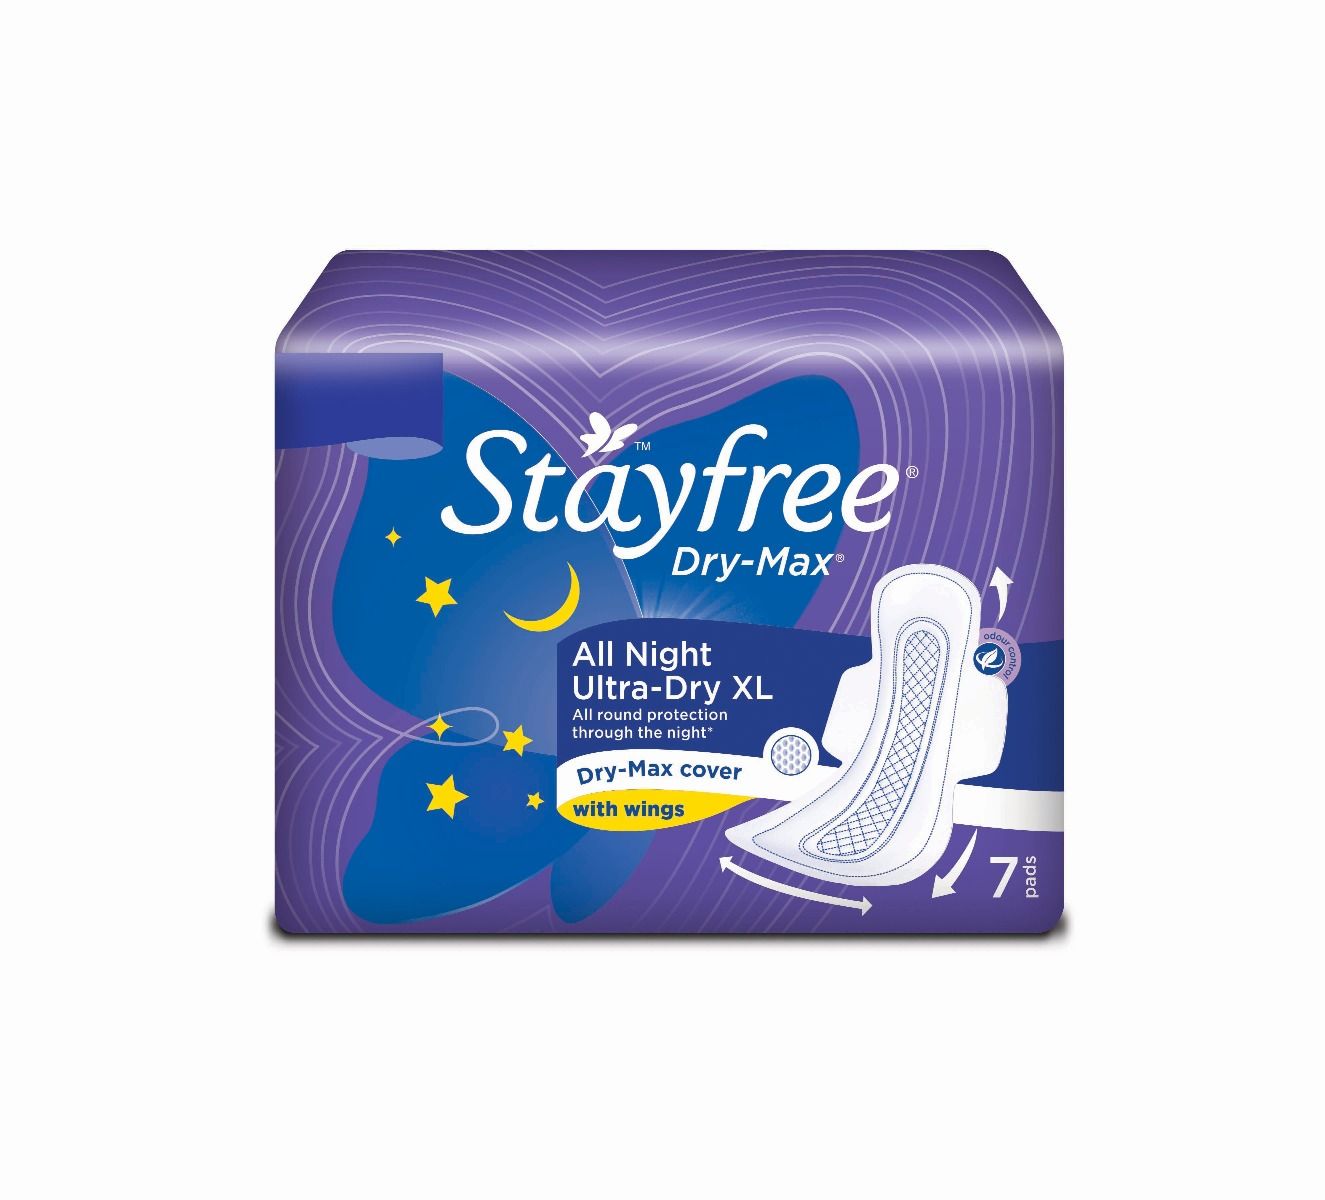 Stayfree Dry-Max All Night Ultra-Dry Pads With Wings XL, 7 Count, Pack of 1 